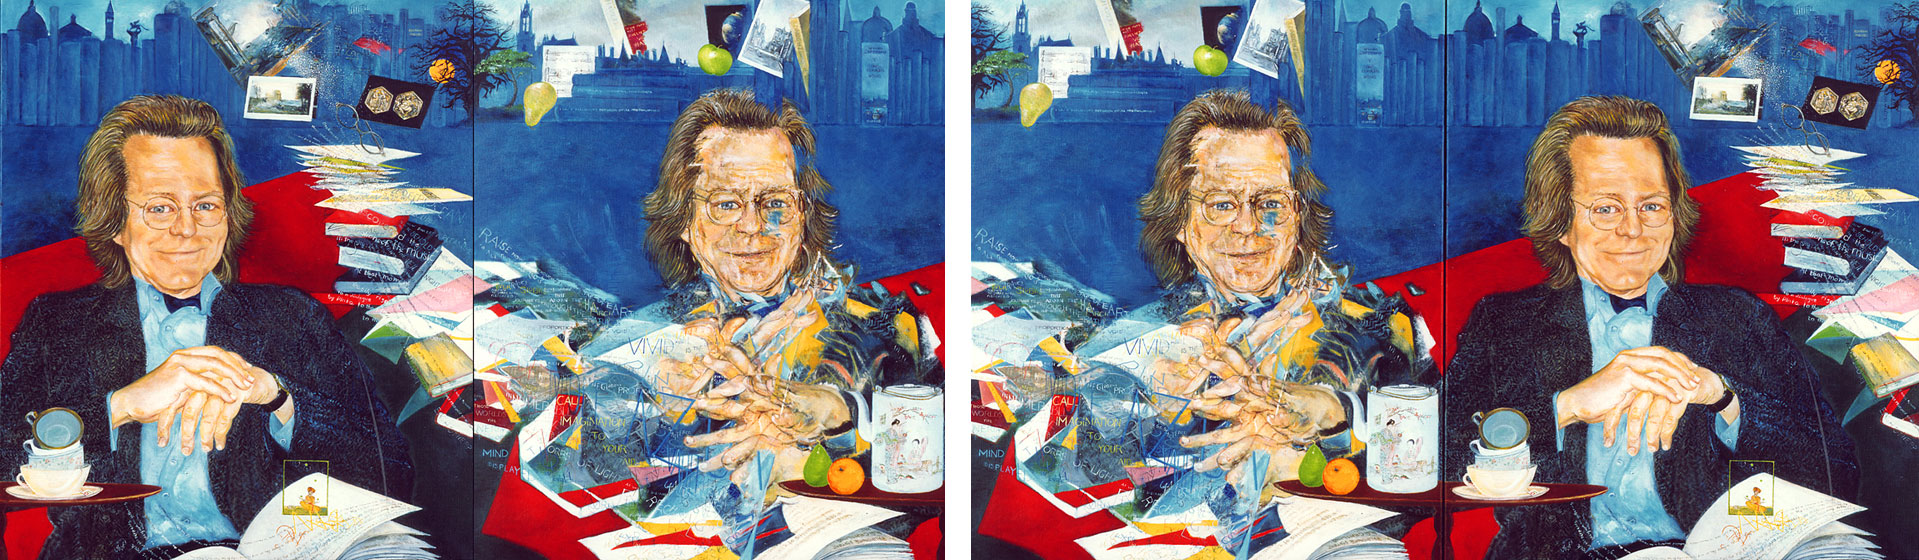 A palindrome portrait of A. C. Grayling